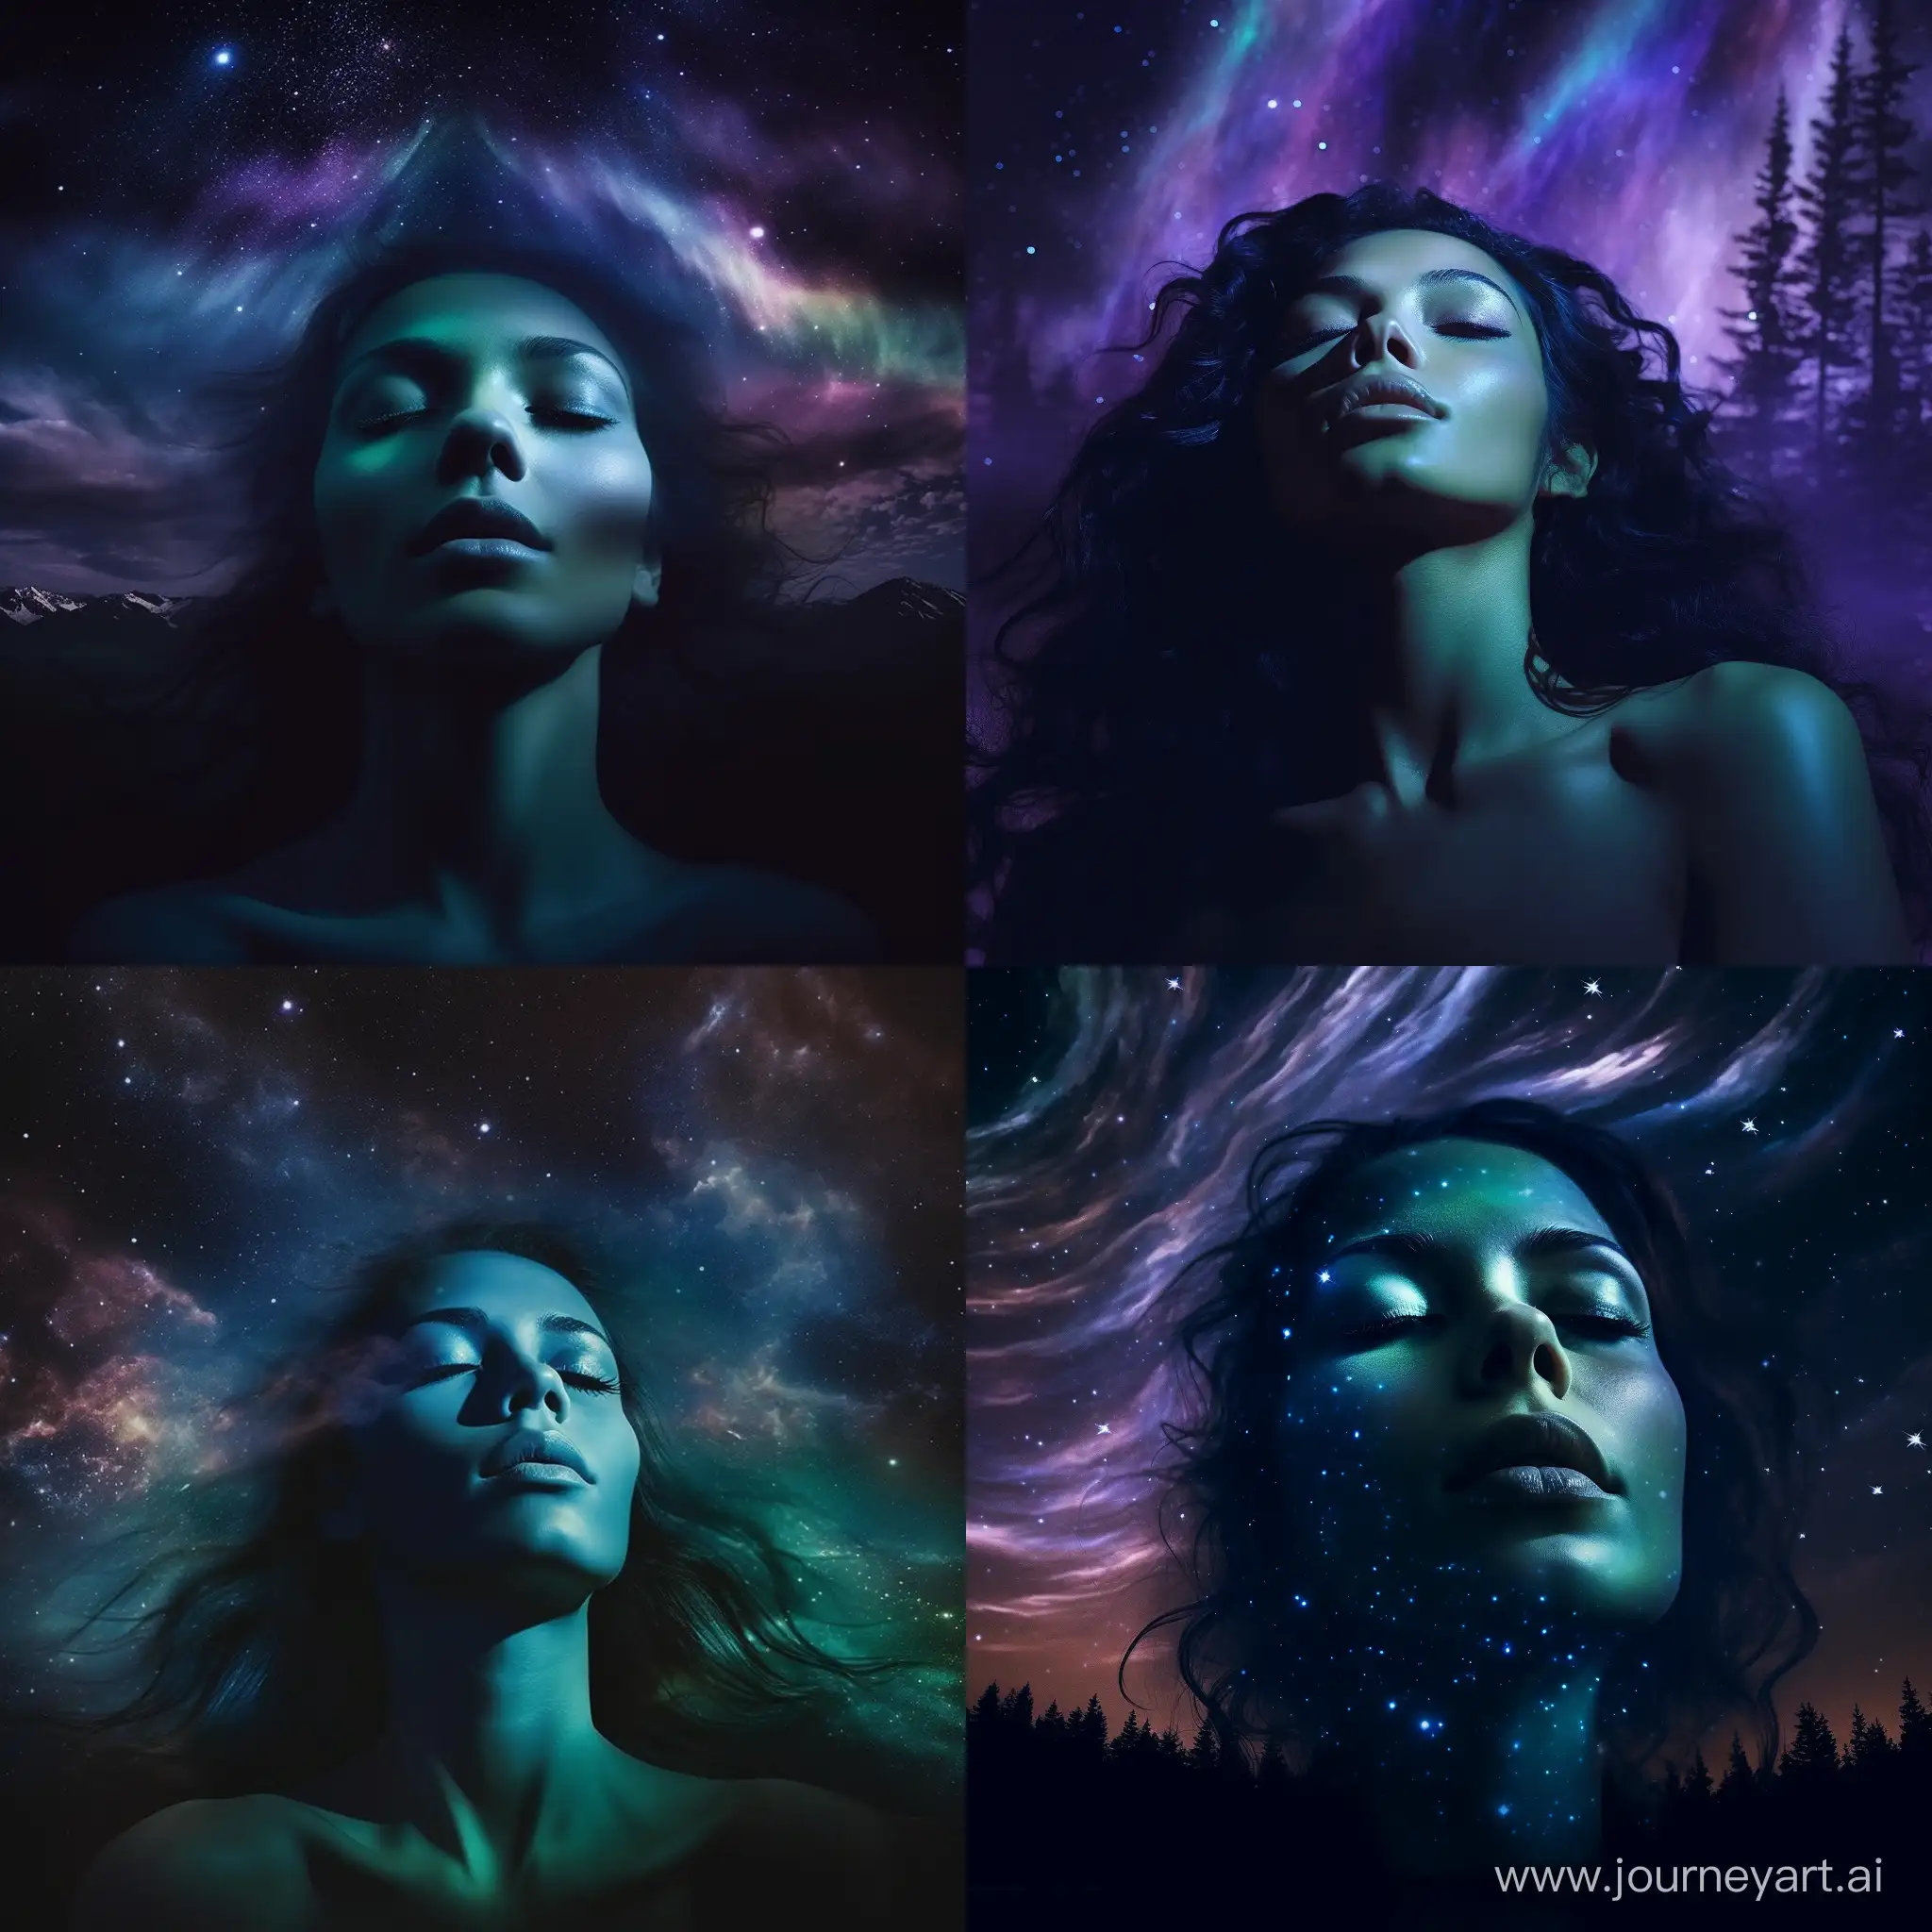 Night sky with stars depicting a woman's face with aurora borealis